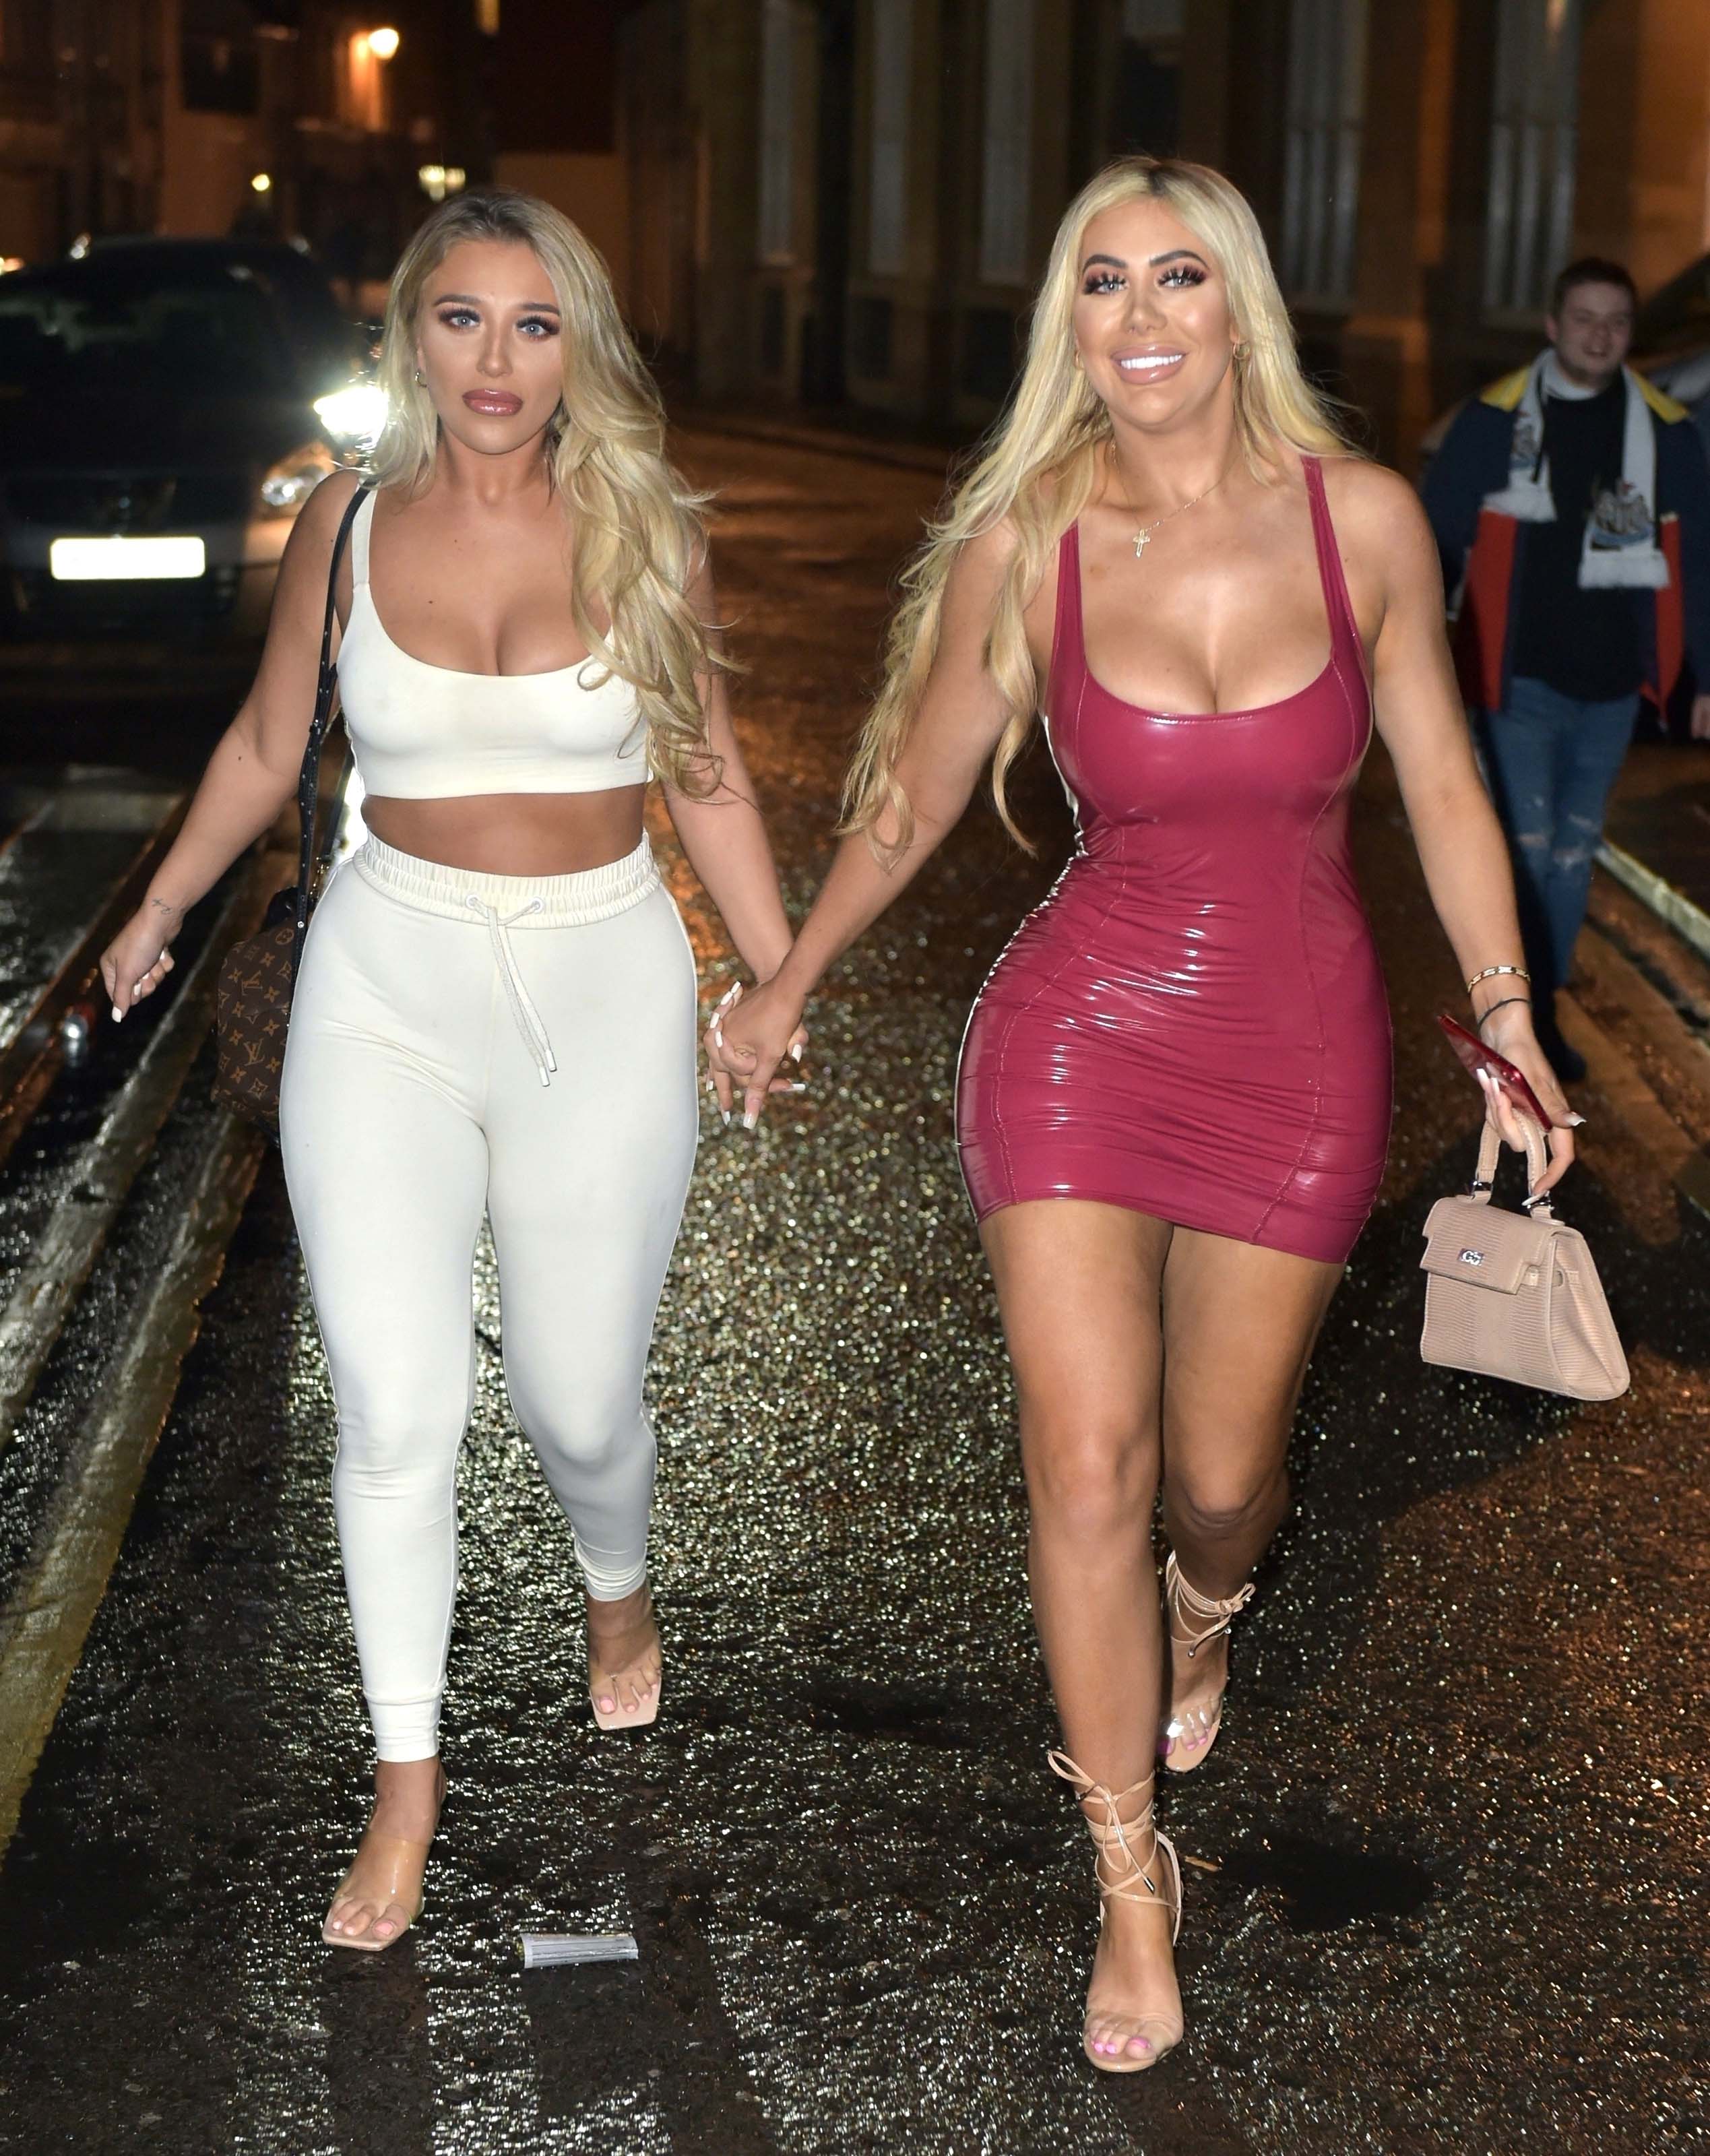 Bethan Kershaw, Chloe Ferry and Sophie Kasaei hit the Toon